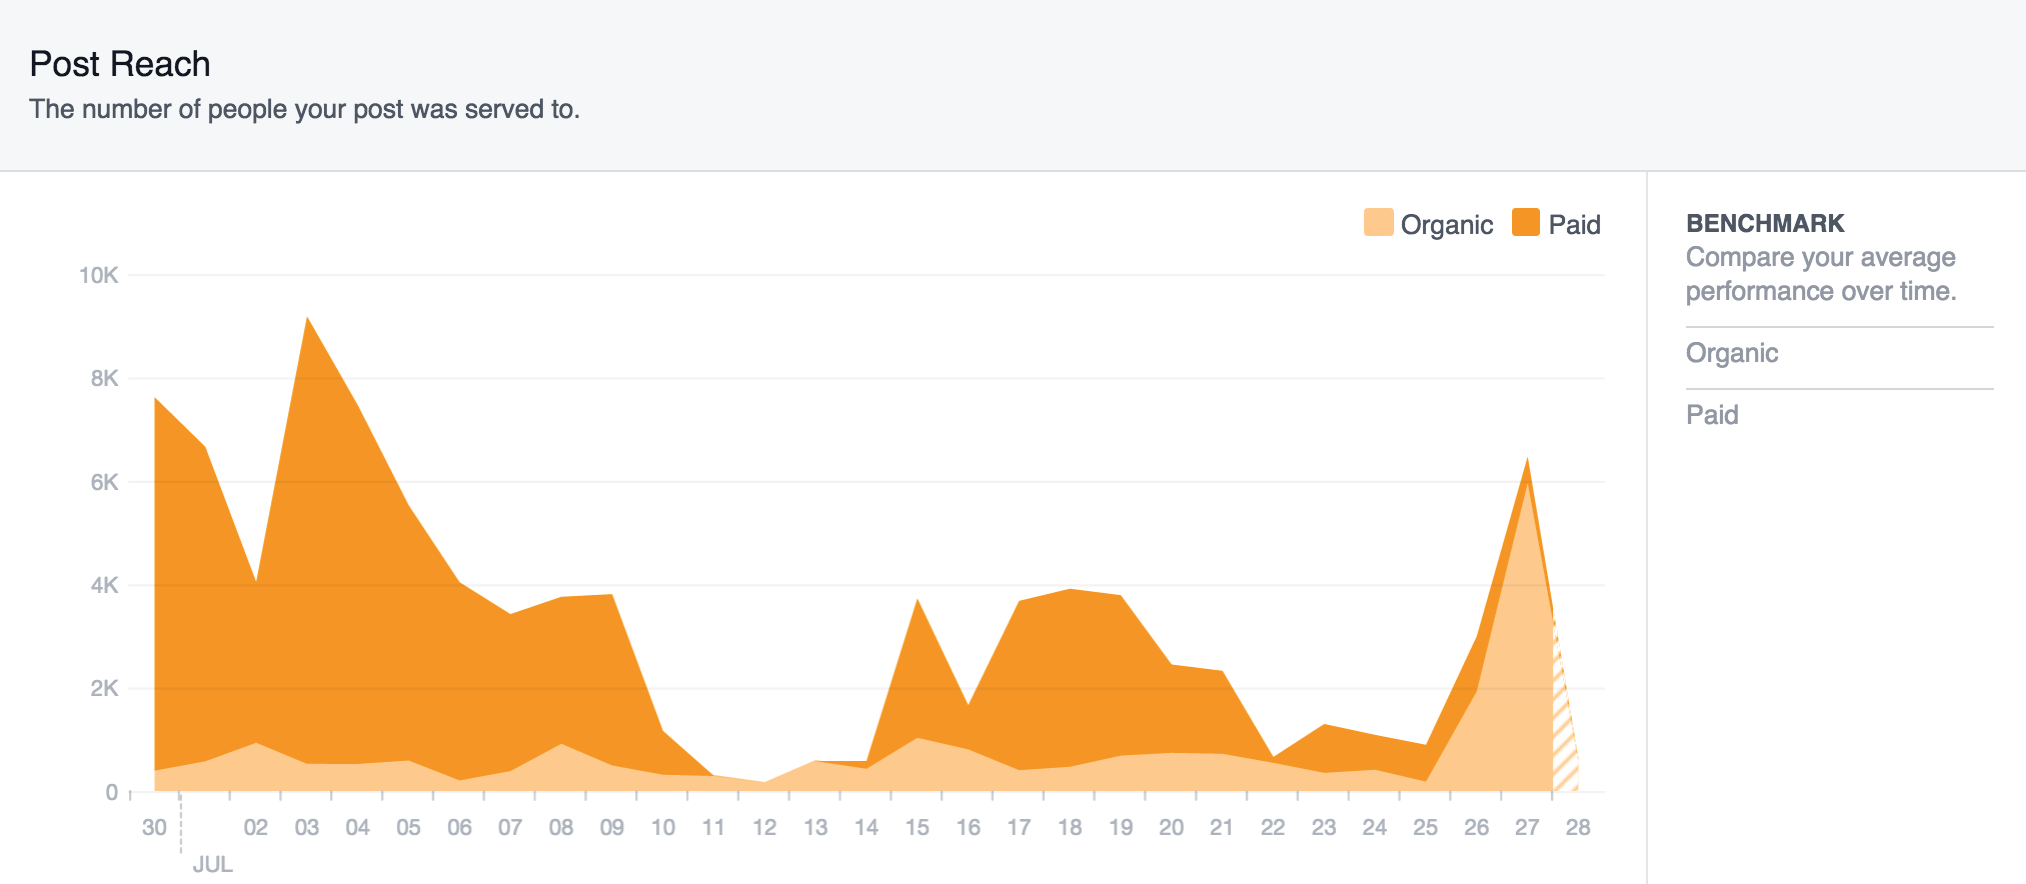 Facebook analytics showing how a post can shift between paid and organic distribution over time.